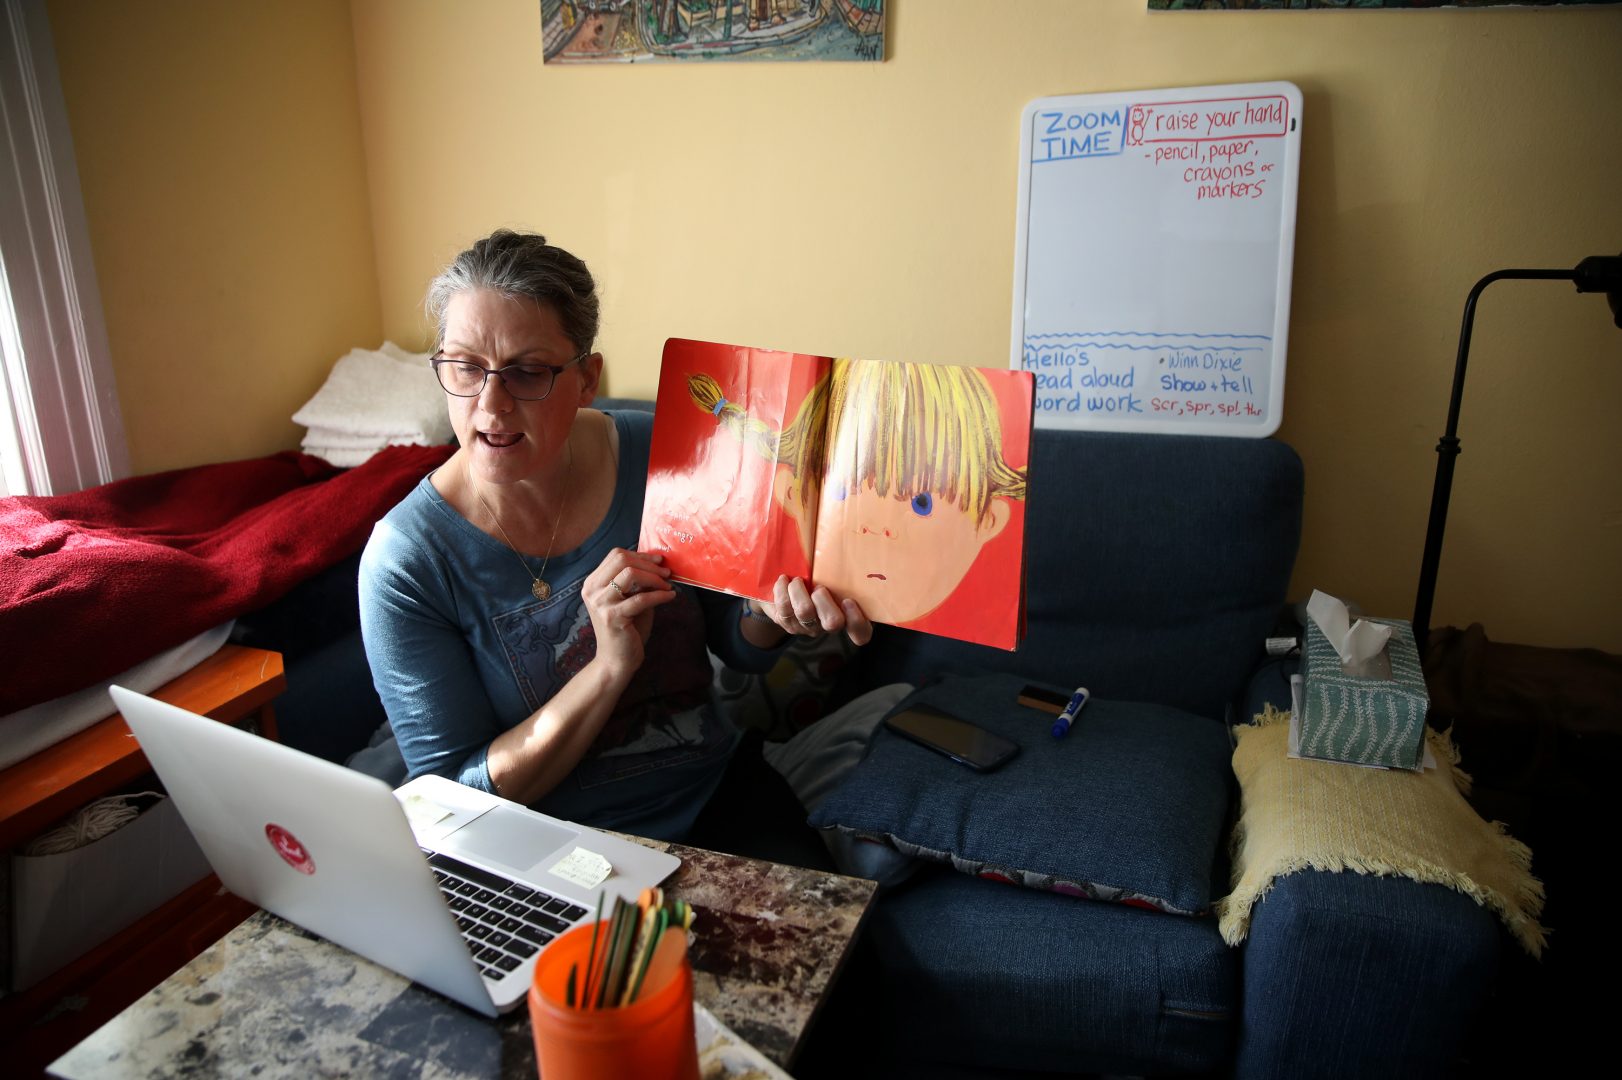 Leanne Francis, first grade teacher at Harvey Milk Civil Rights Academy, conducts an online class from her living room on March 20, 2020 in San Francisco, Calif. With schools closed across the U.S., teachers are holding some classes online.